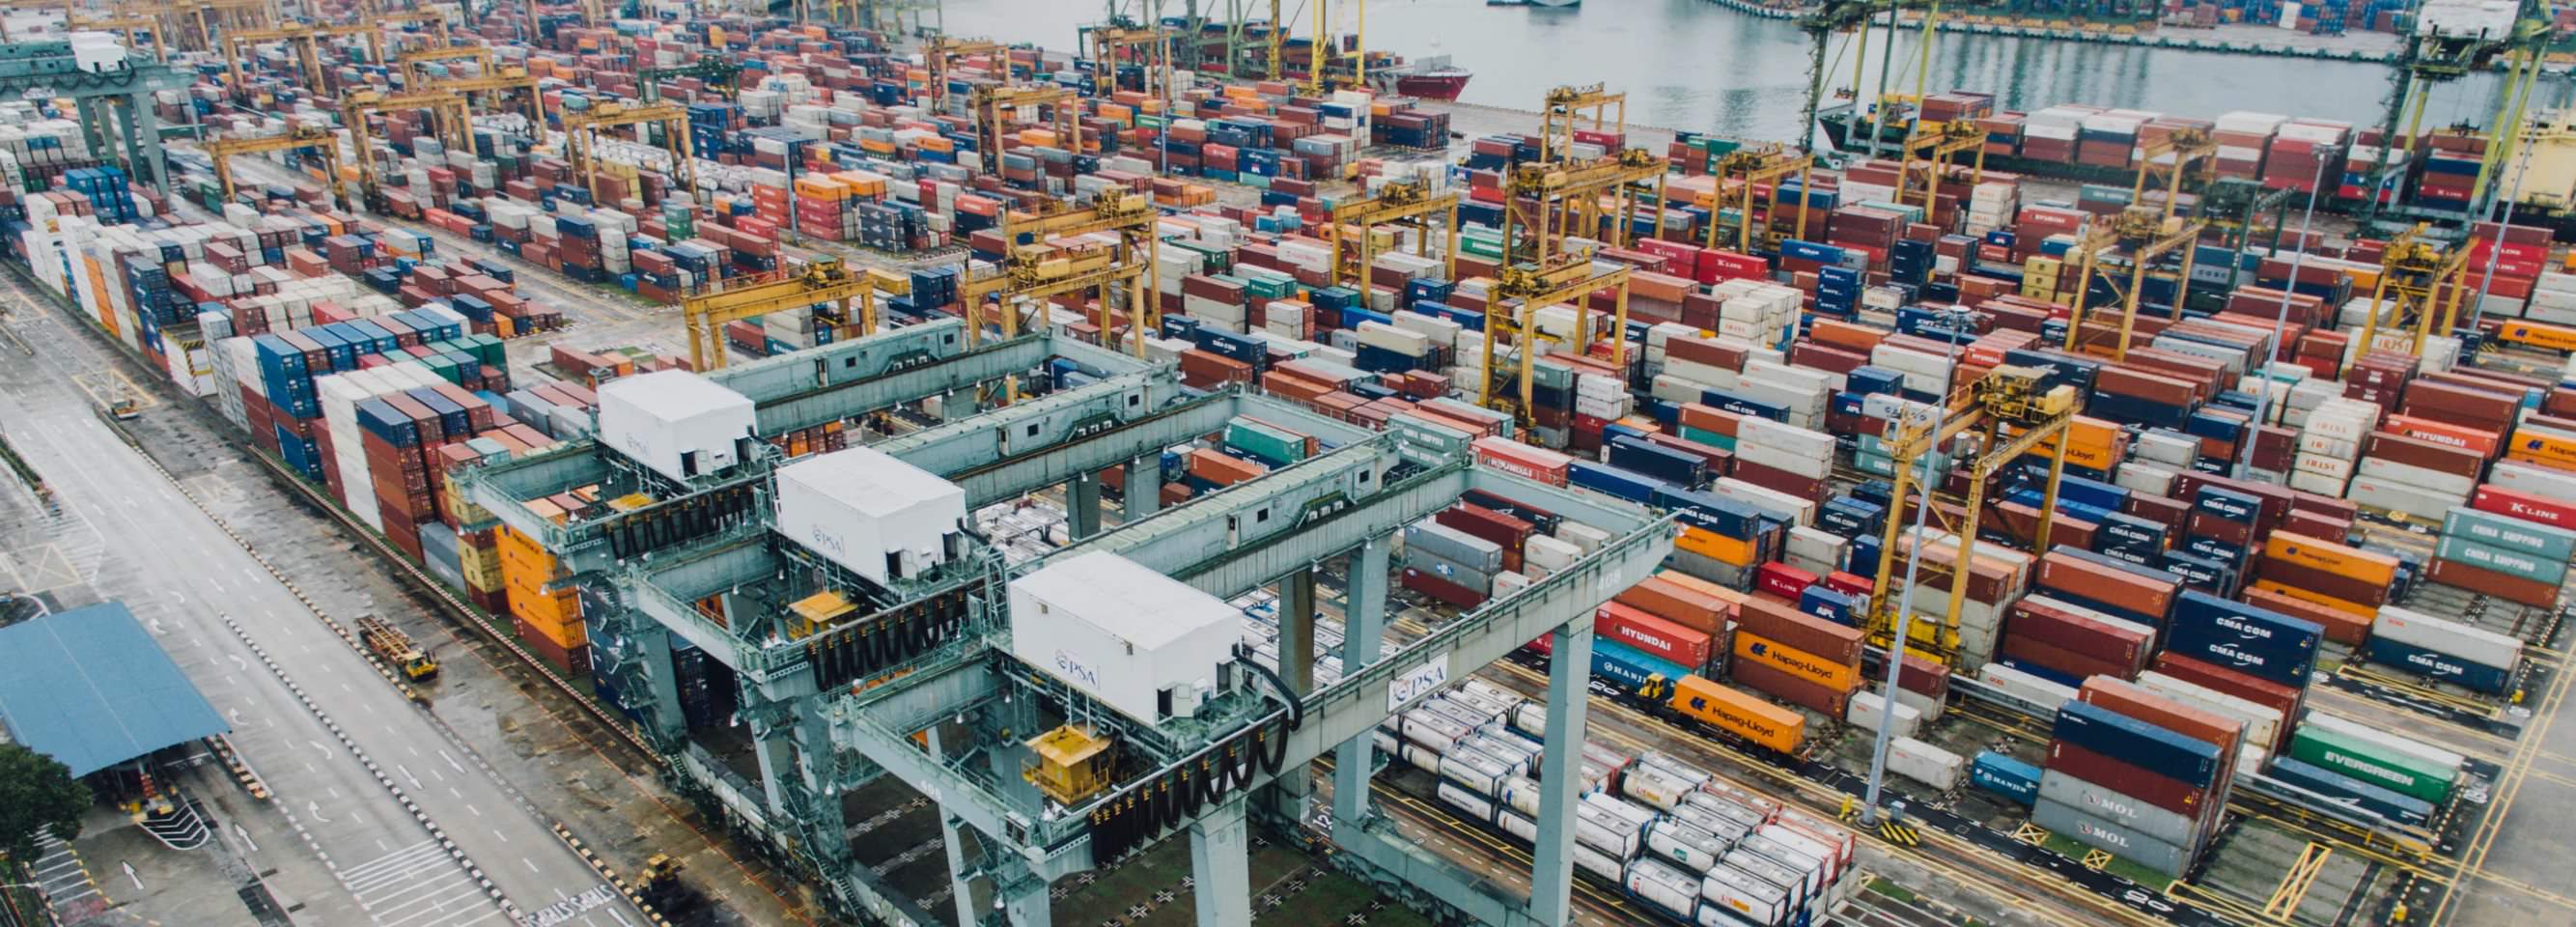 IoT connects sensors, products, equipment, vehicles, and employees in real-time, providing visibility in warehousing operations and freight transportation to supply chain management.